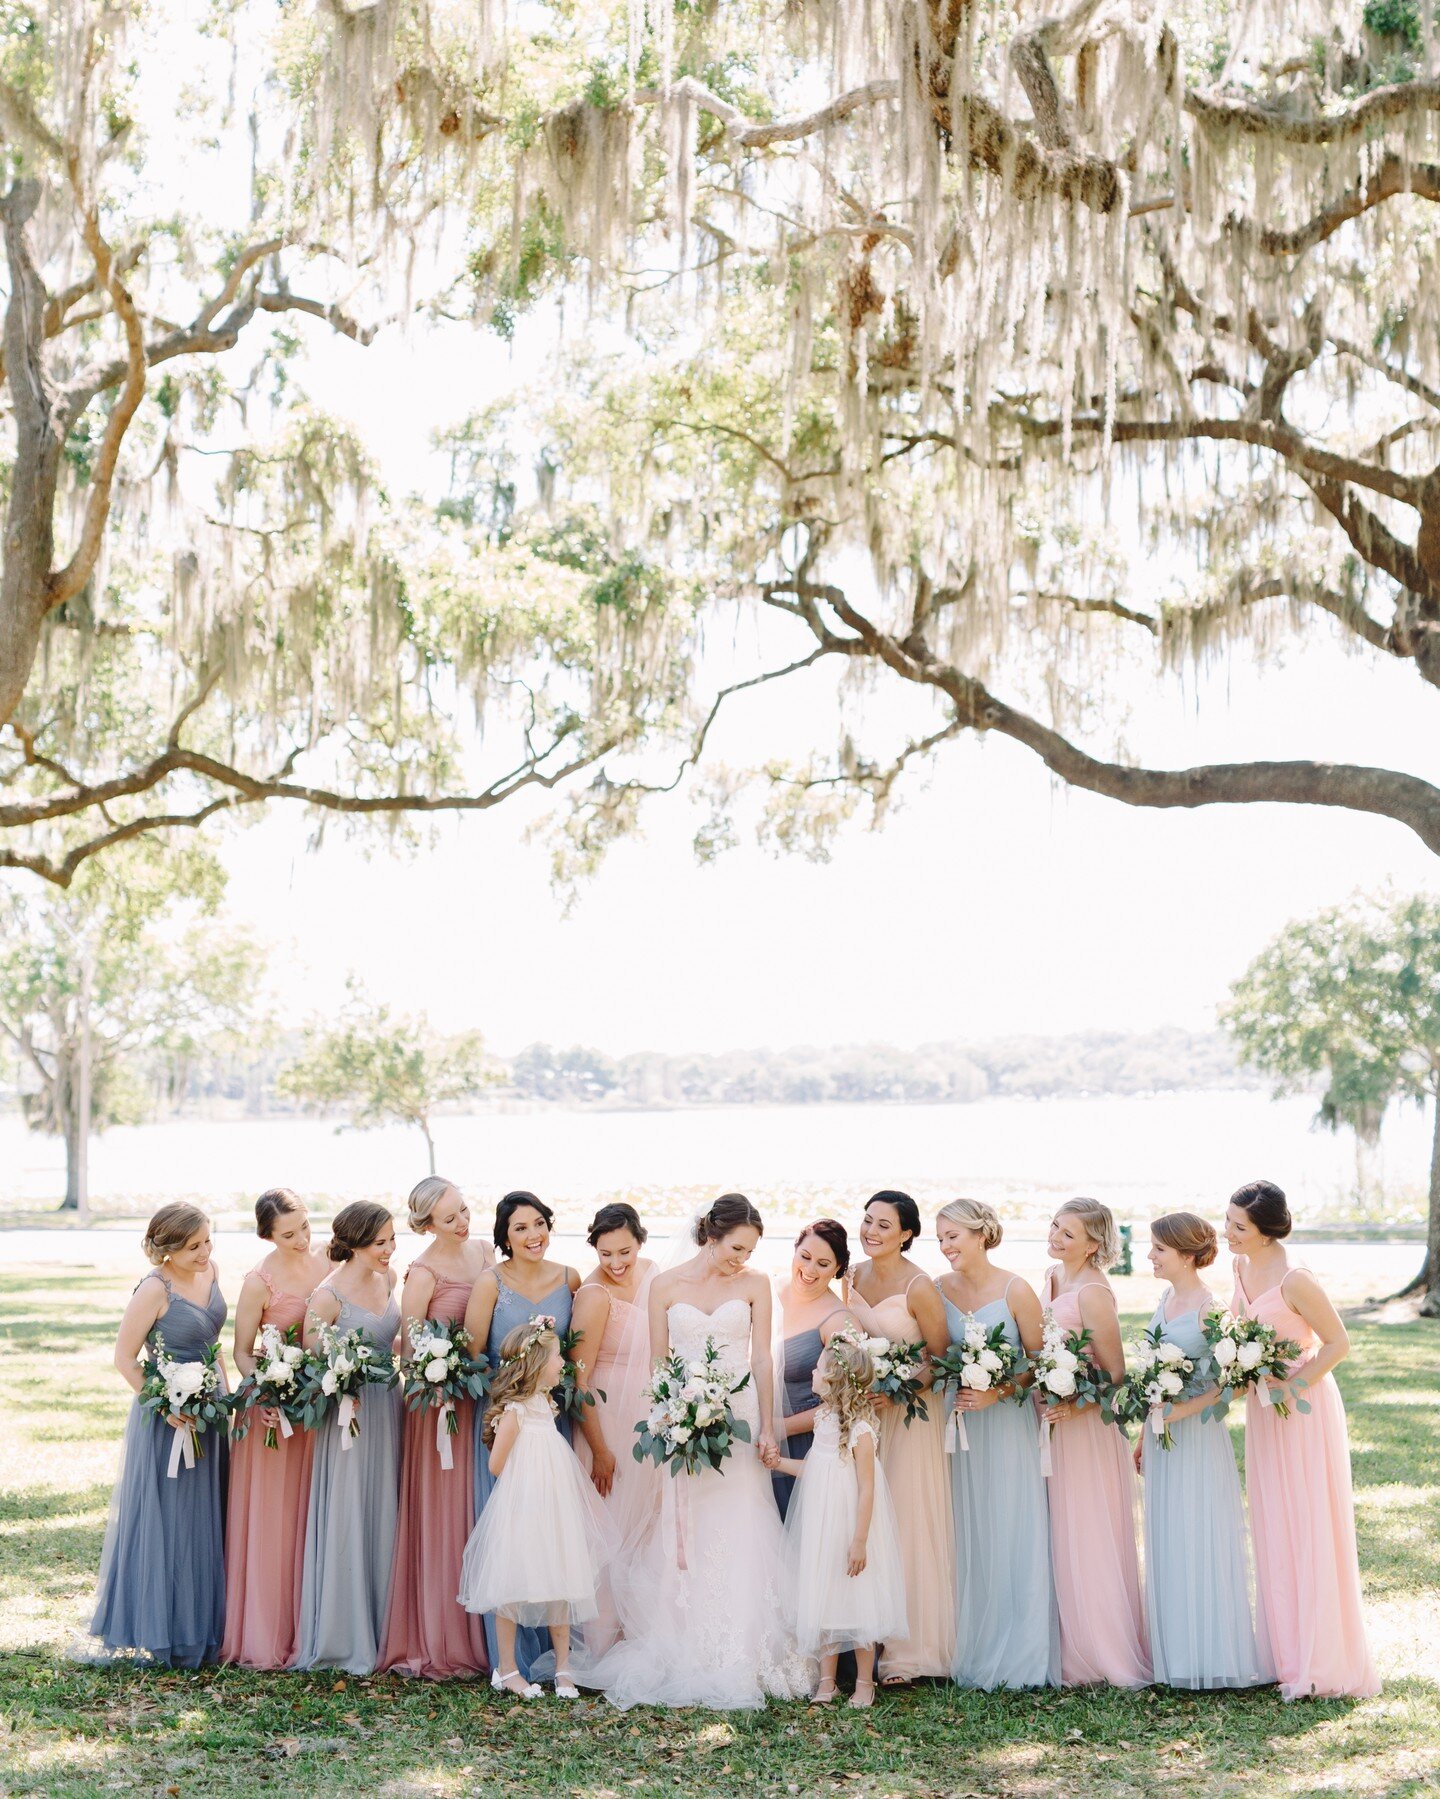 Arielle and all her girls under the beautiful Florida oaks.